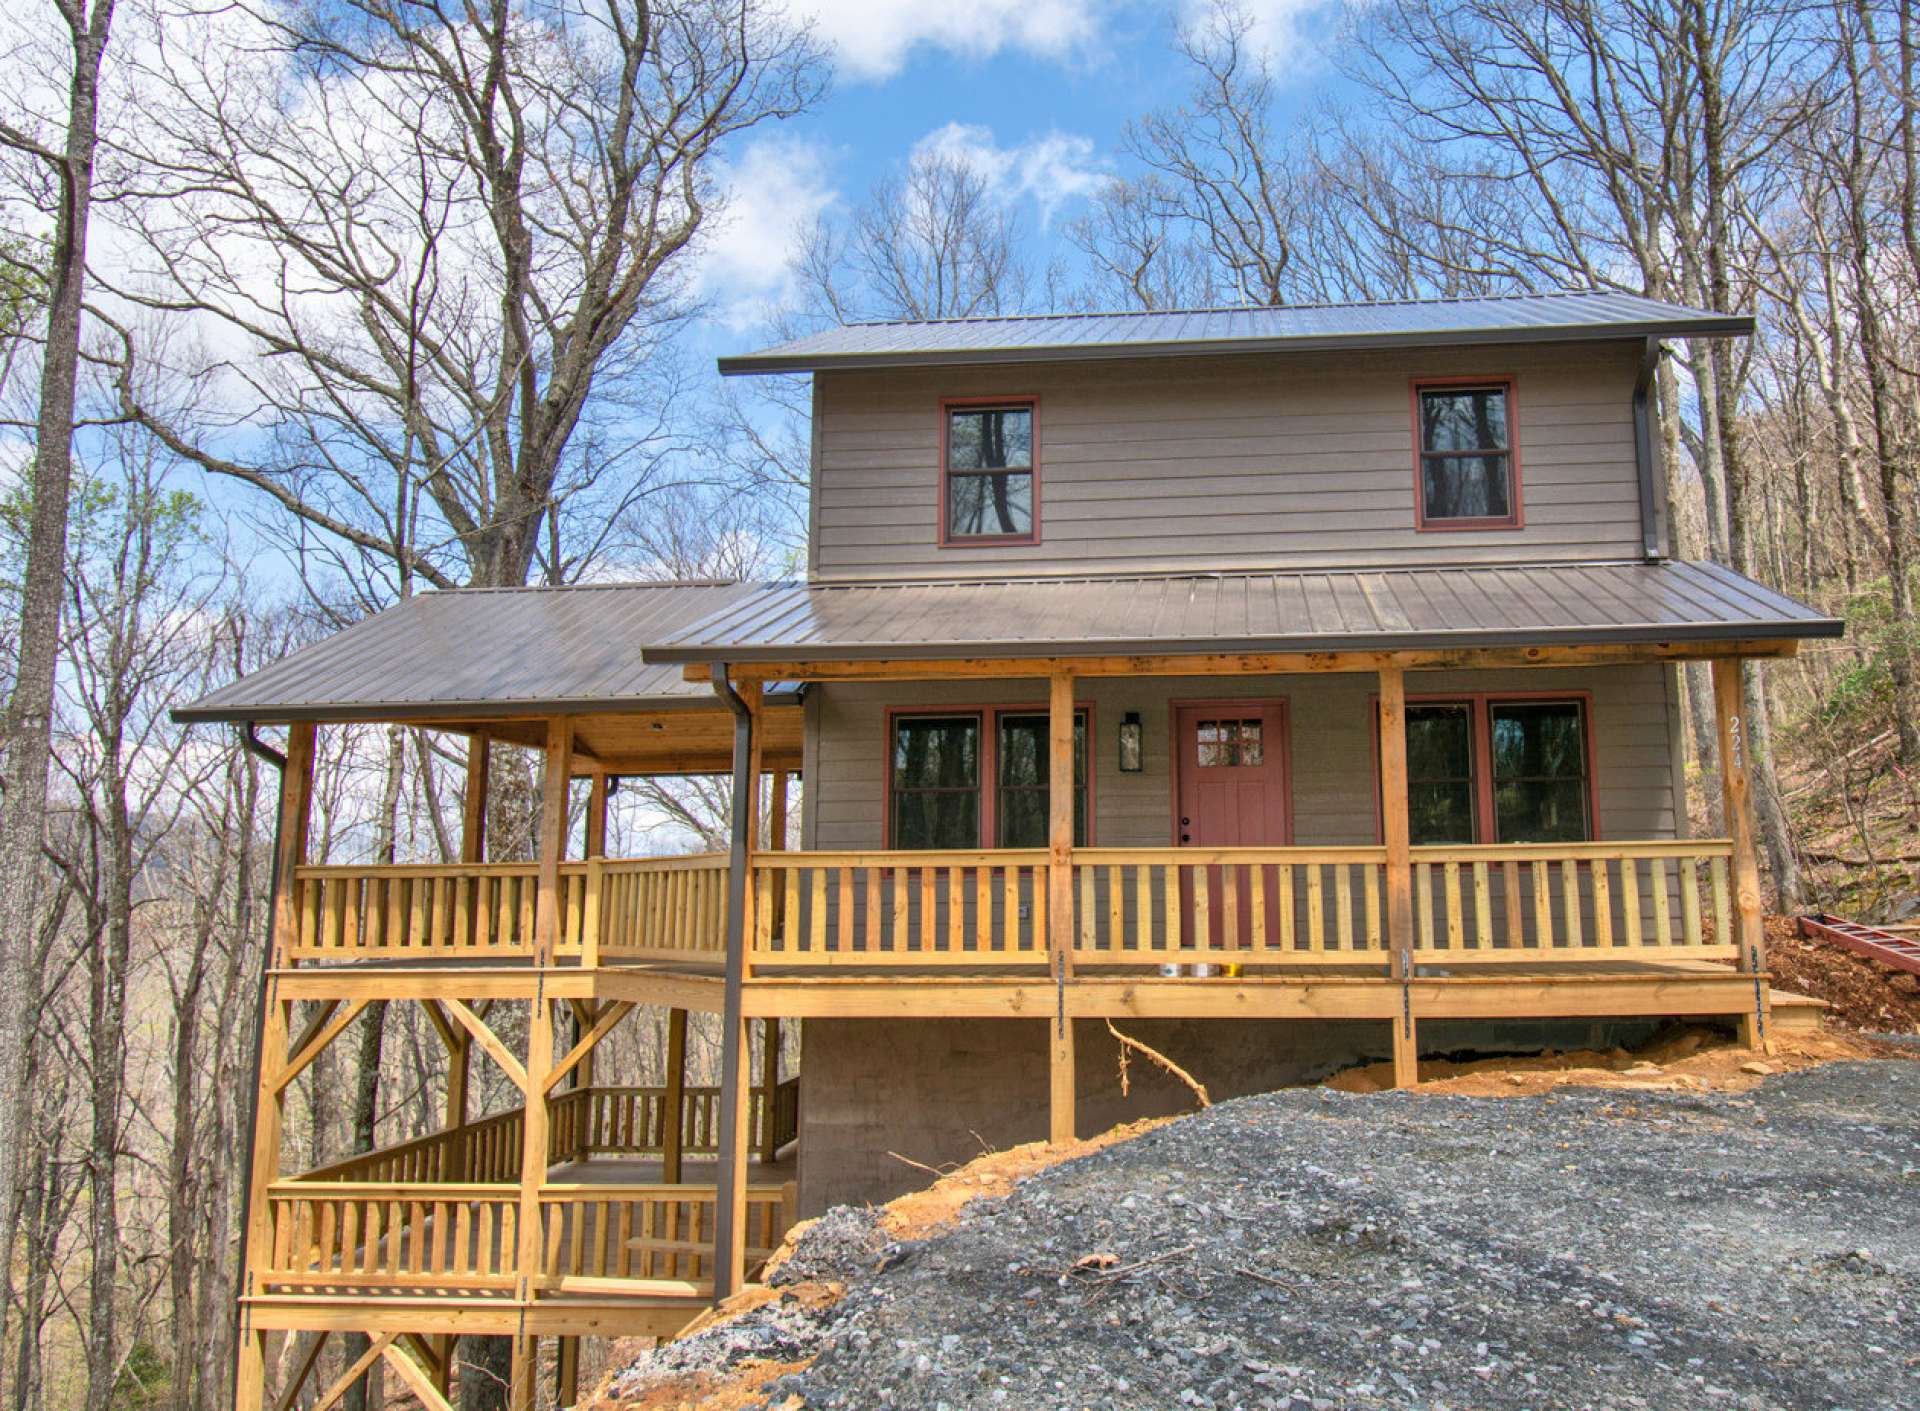 This brand-new home offers a perfect blend of craftsmanship, comfort, and mountain living making it an ideal NC Mountain retreat or primary home.